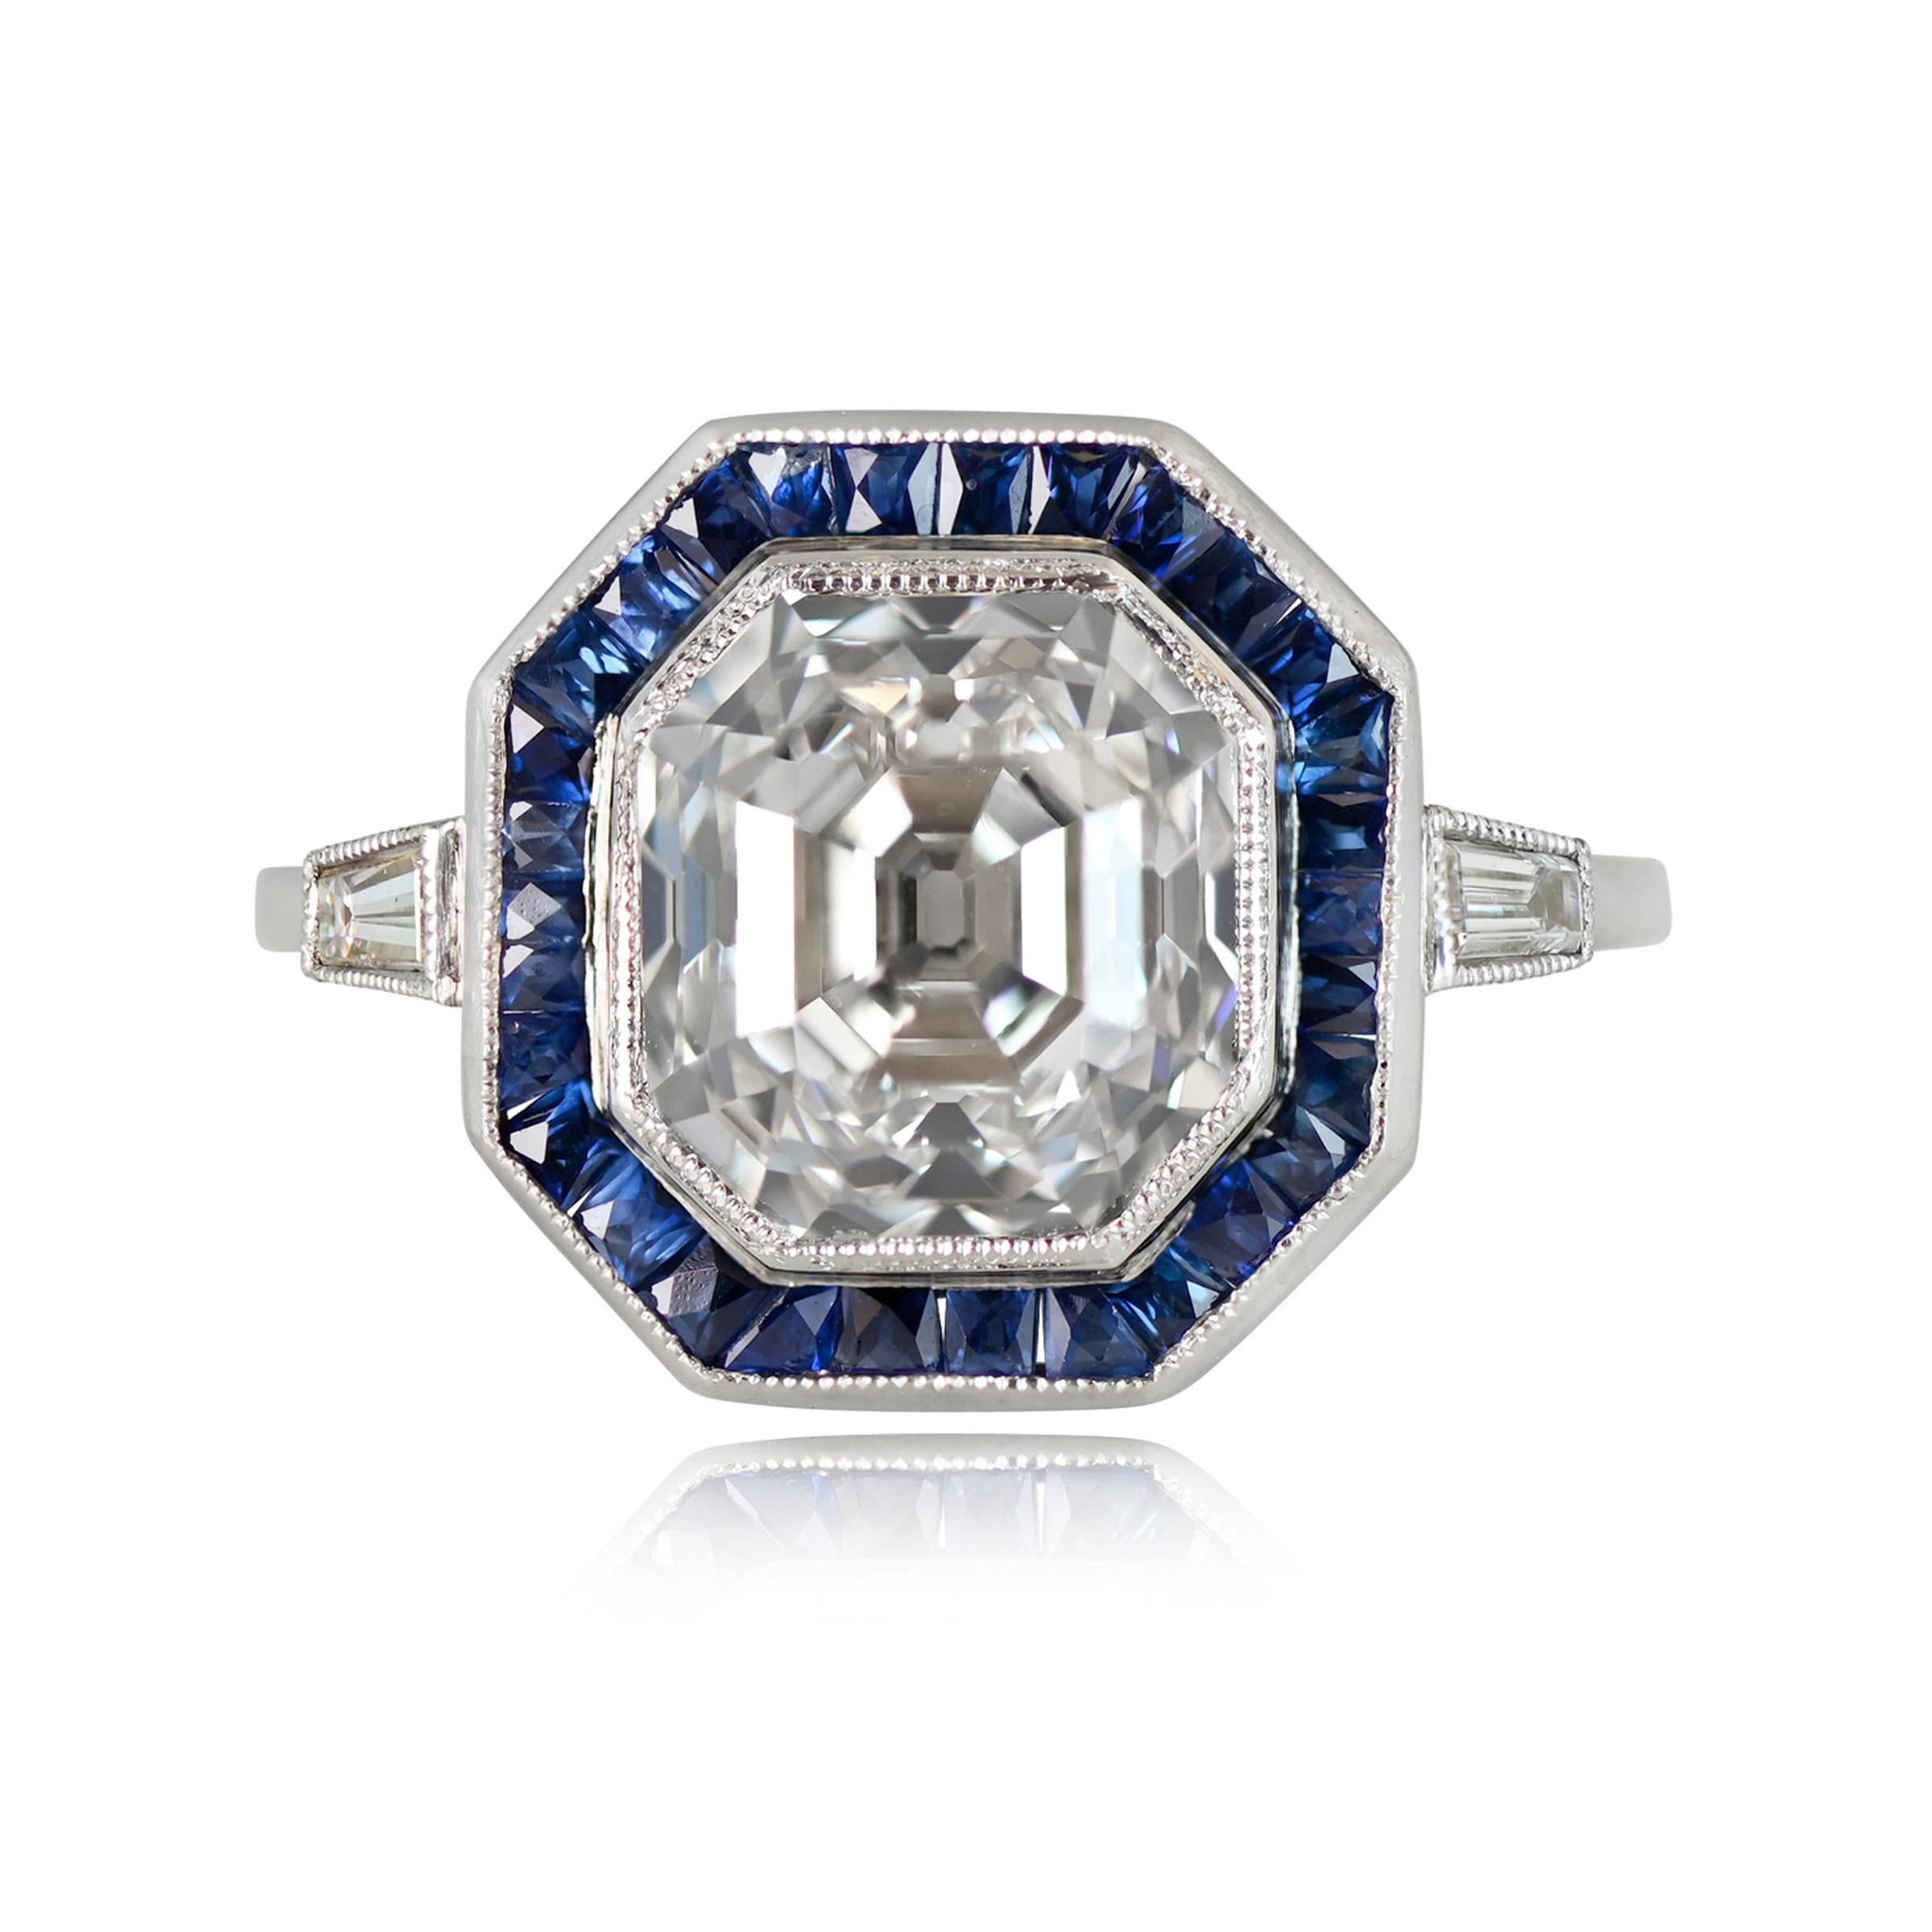 An exquisite diamond and sapphire halo ring, showcasing a breathtaking 4.09 carat GIA certified antique Asscher-cut diamond of impeccable G color and VS1 clarity. The rarity of such an antique gem is unparalleled, making this piece a true